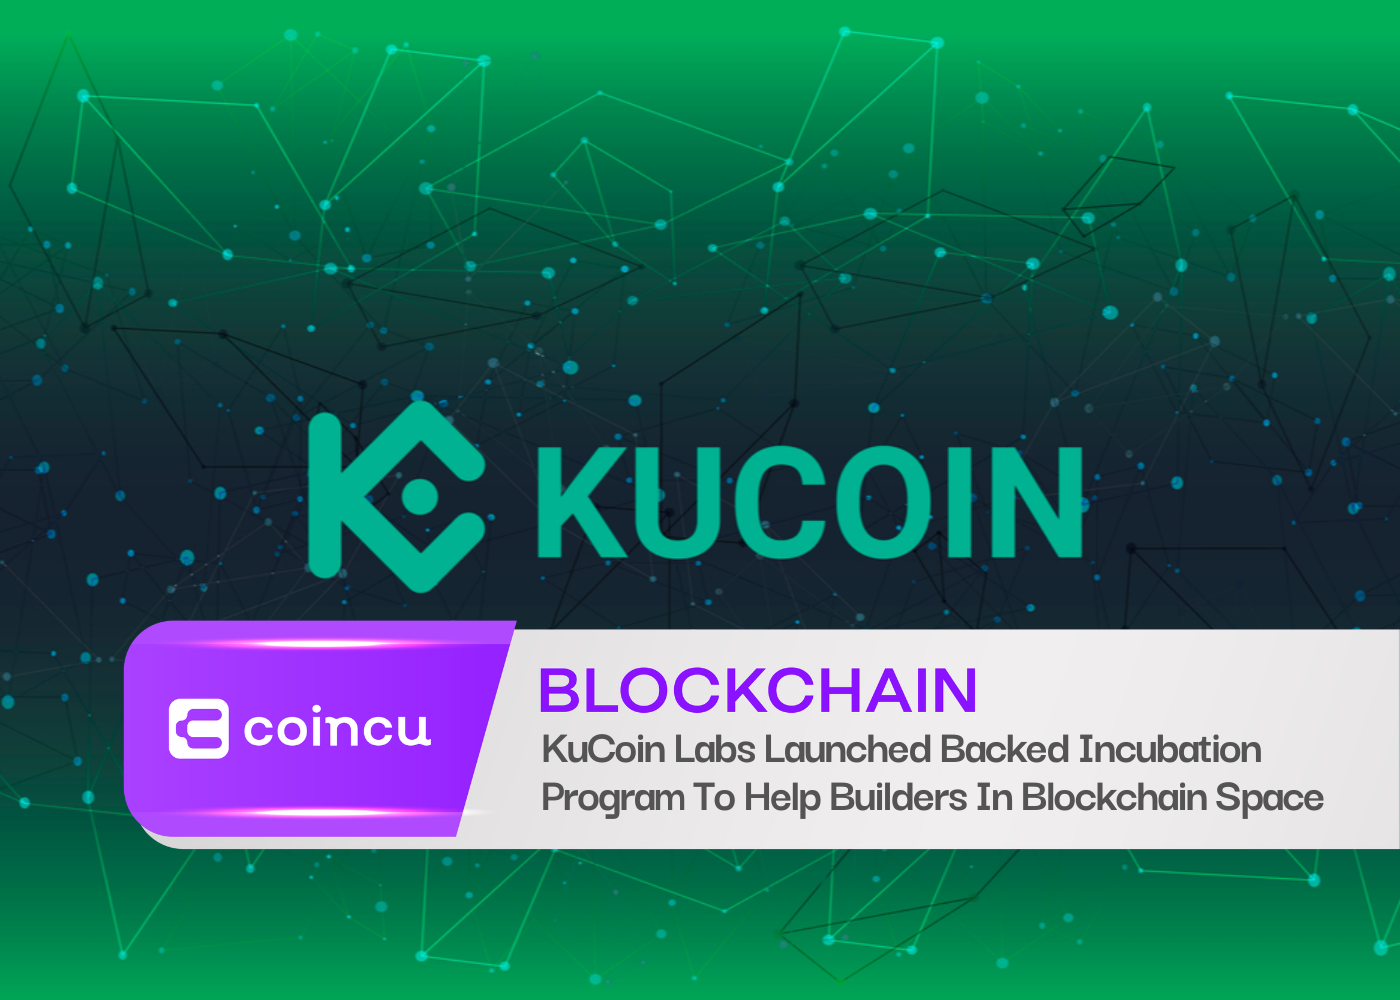 KuCoin Labs Launched Backed Incubation Program To Help Builders In Blockchain Space